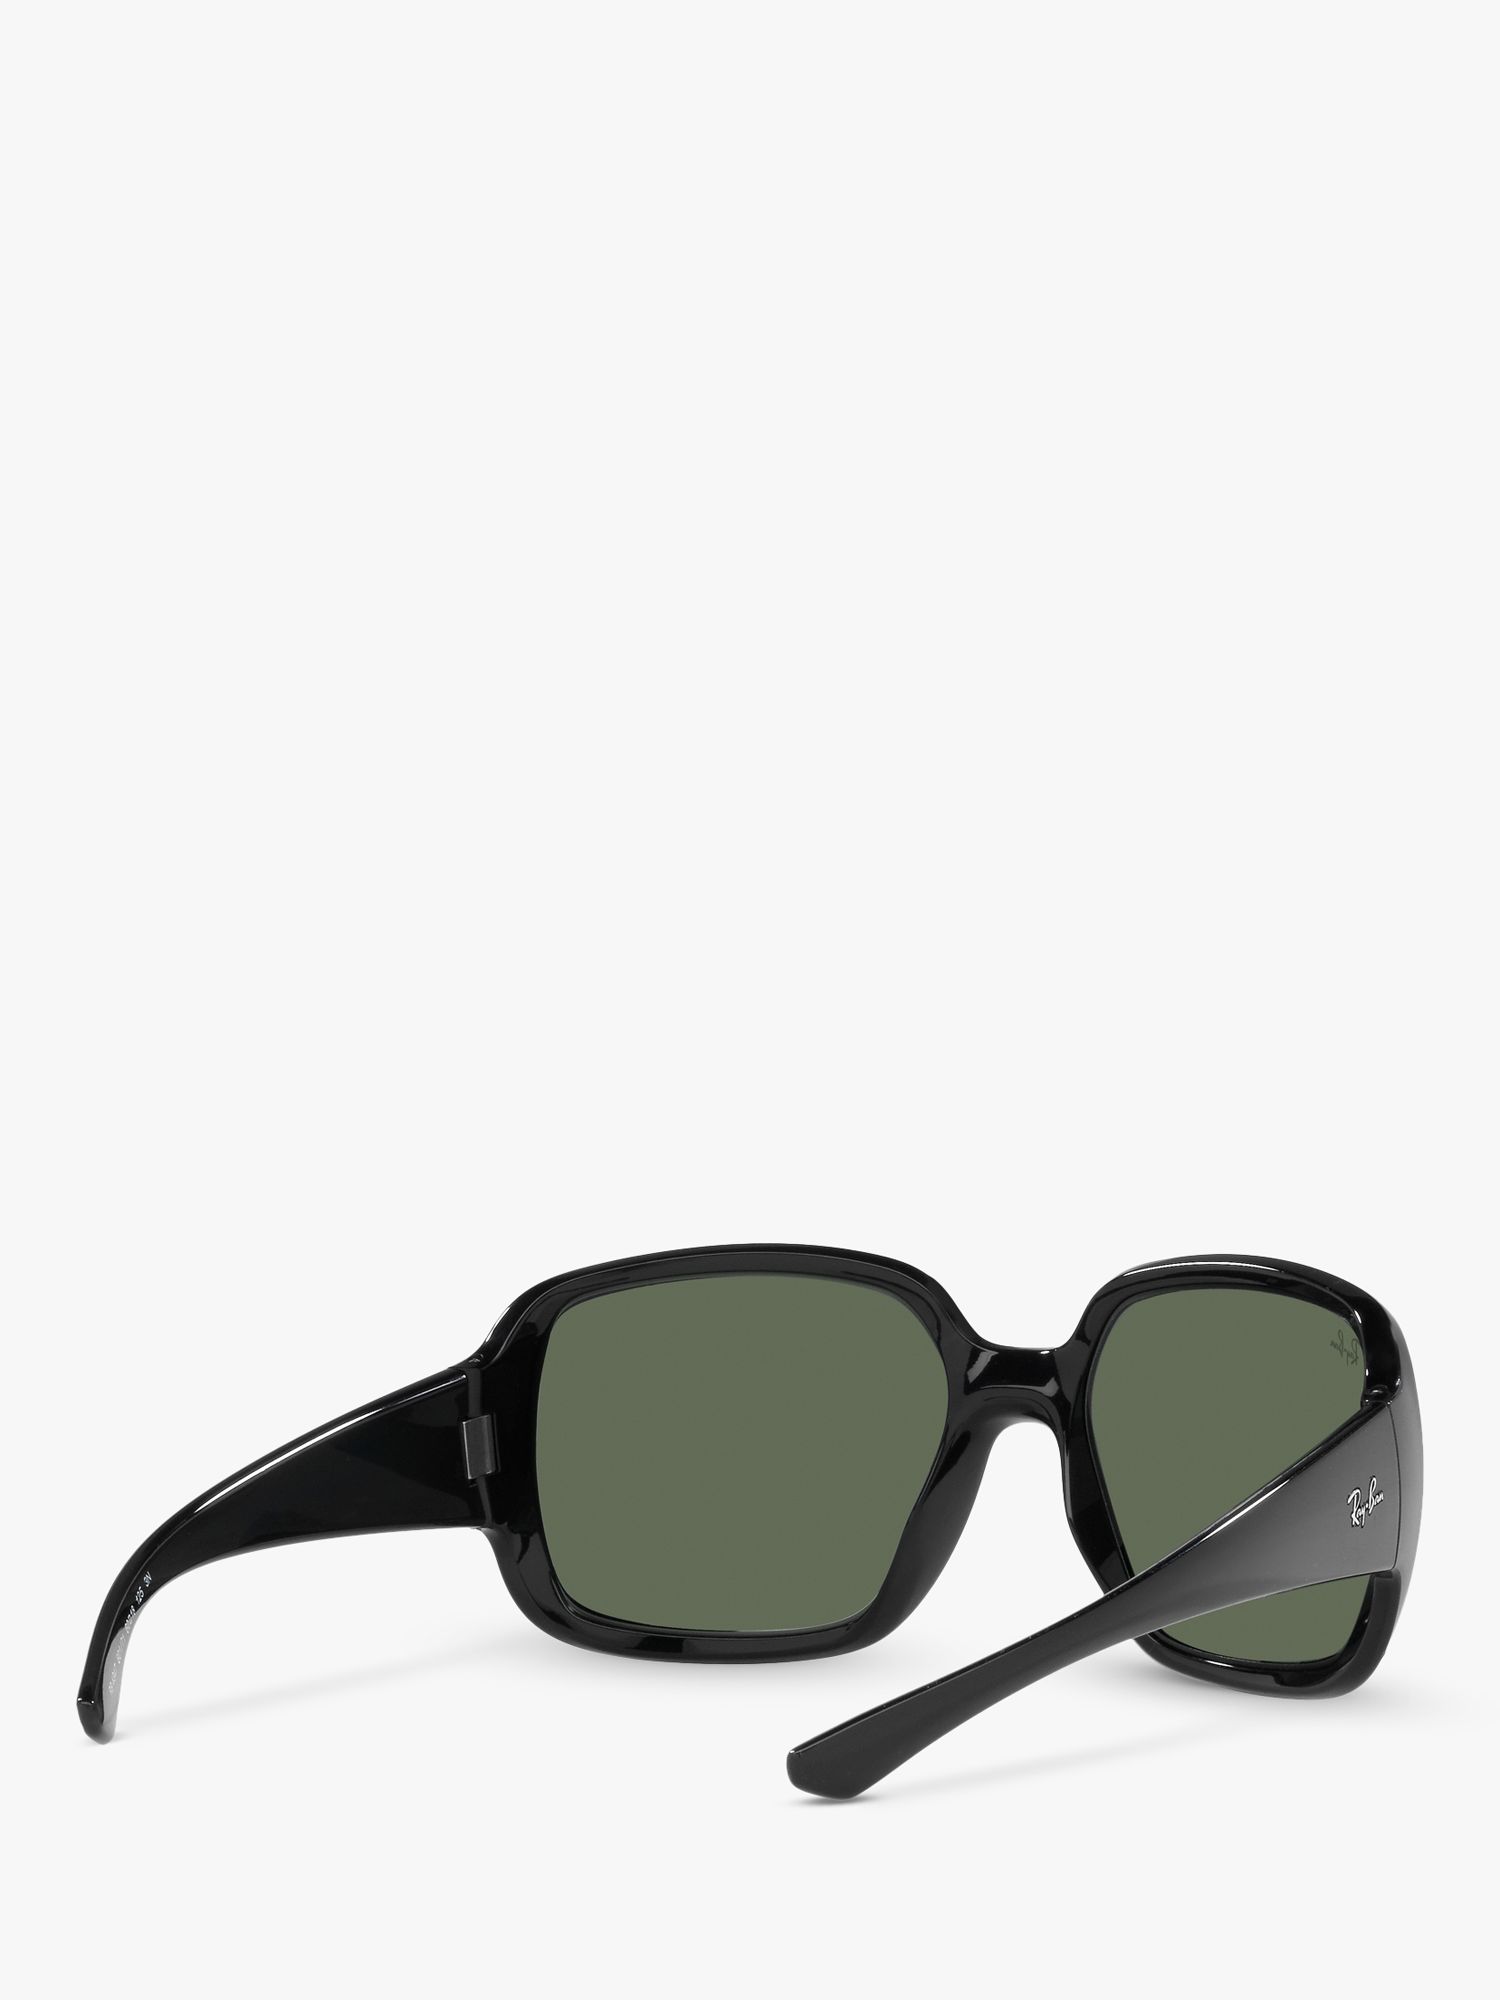 Ray-Ban RB4347 Unisex Square Sunglasses, Black/Green Classic at John Lewis  & Partners